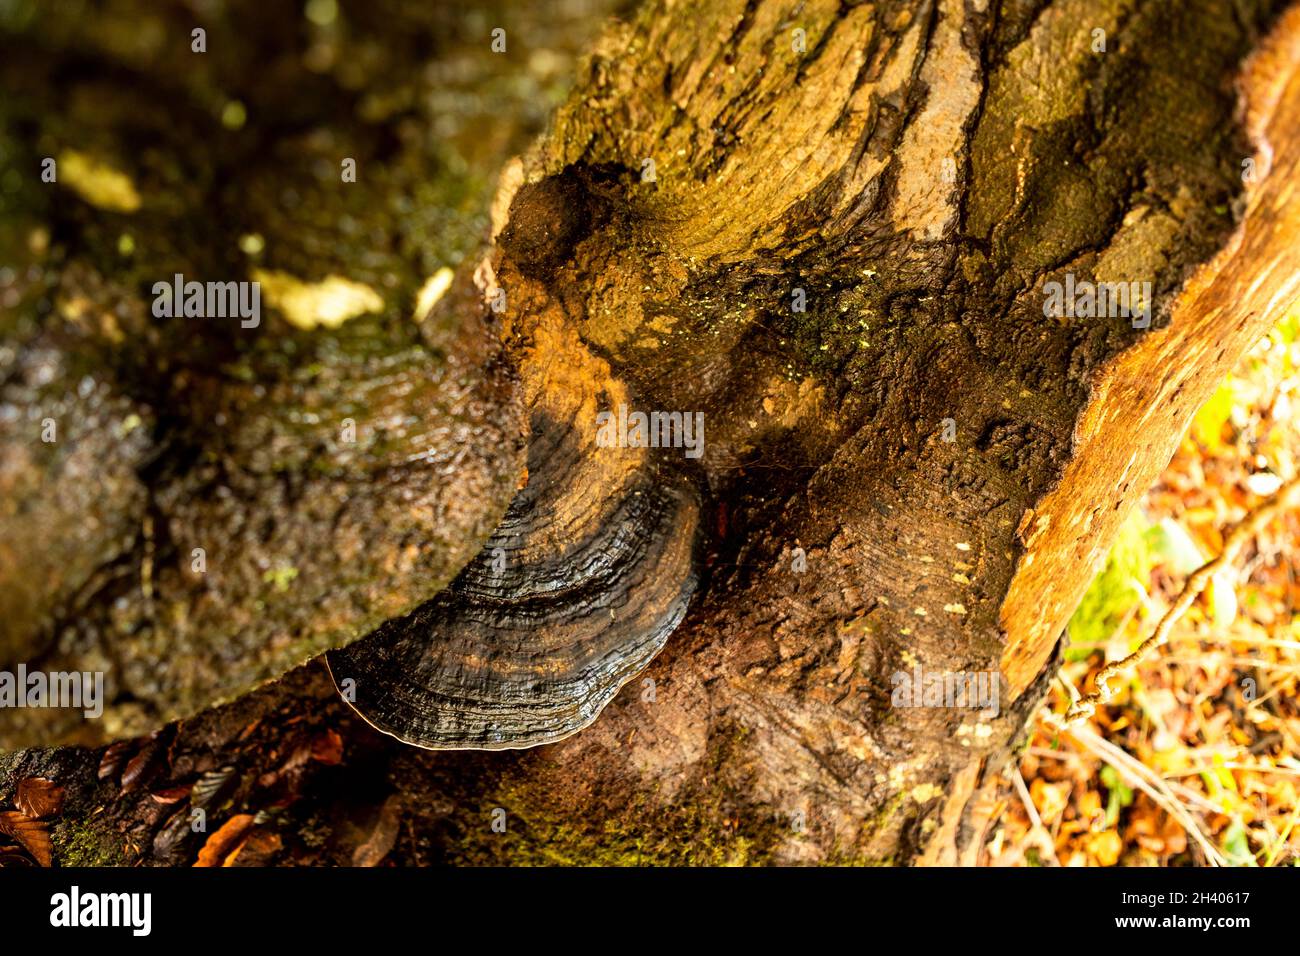 Fomitopsis pinicola, Red-belted Bracket. Autumn, Forest of Dean, England. Fungus Stock Photo